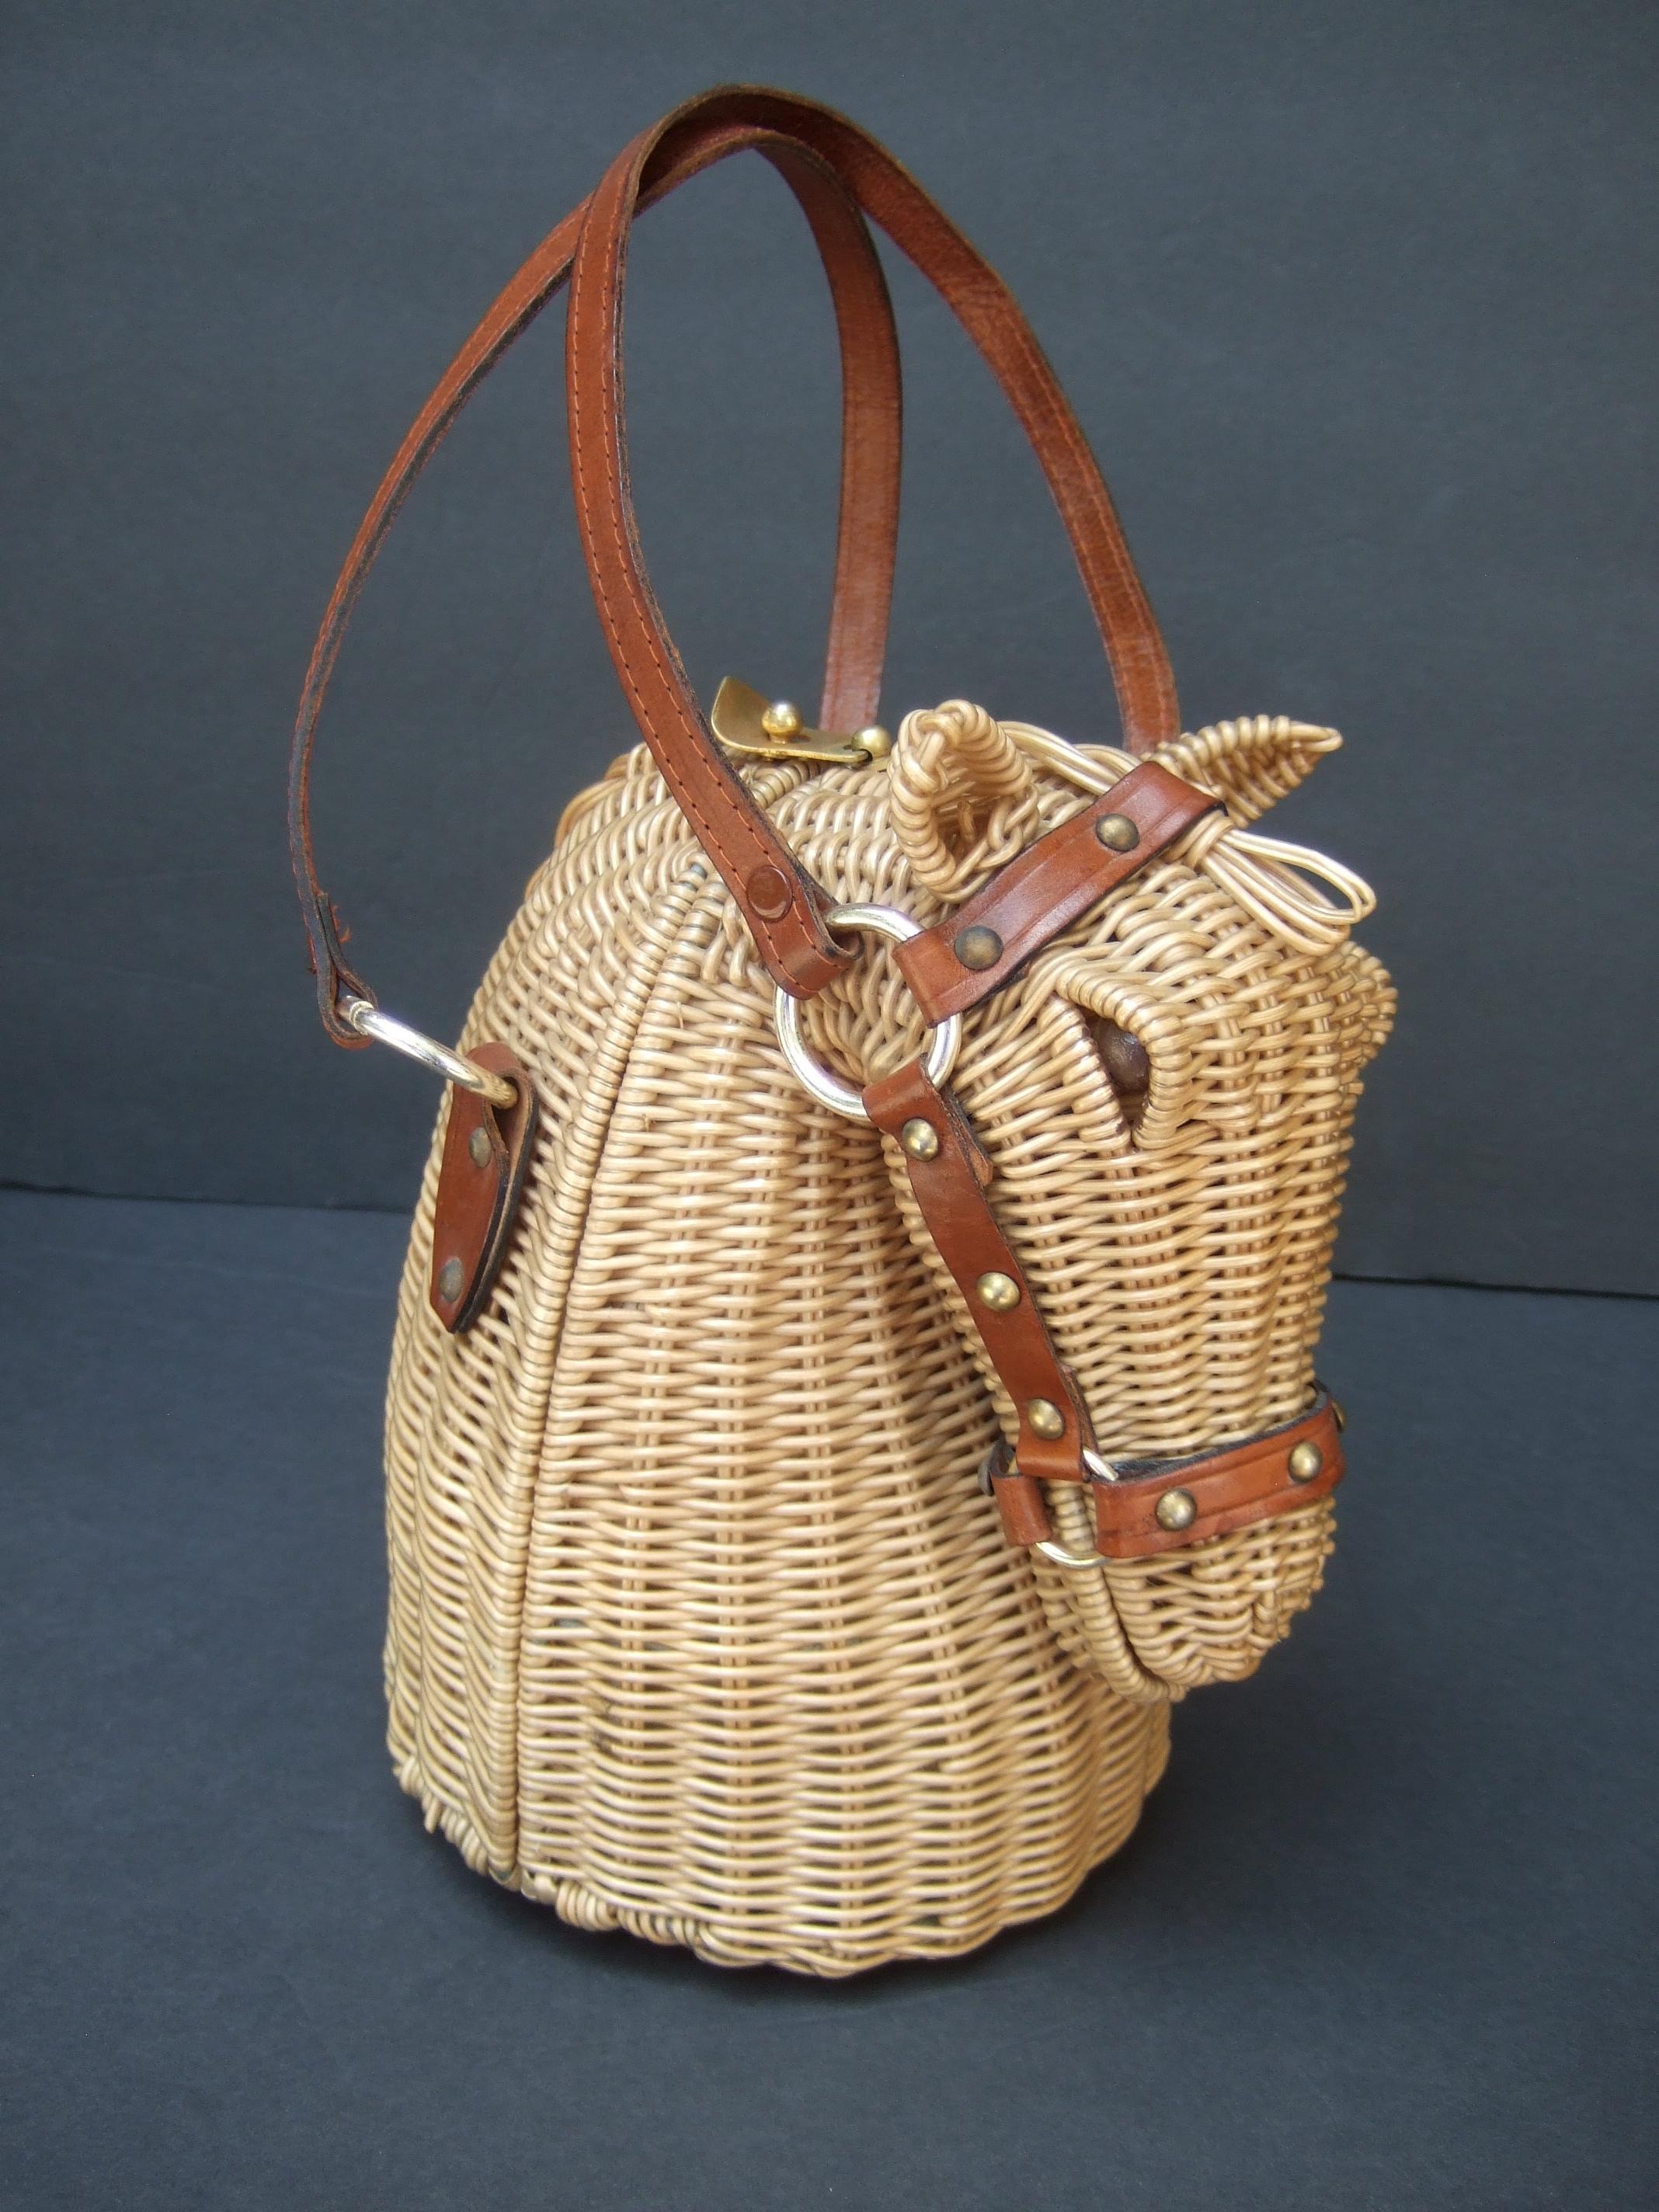 Extremely Rare Wicker Rattan Equine Handbag Designed by Marcus Brothers c 1970 4